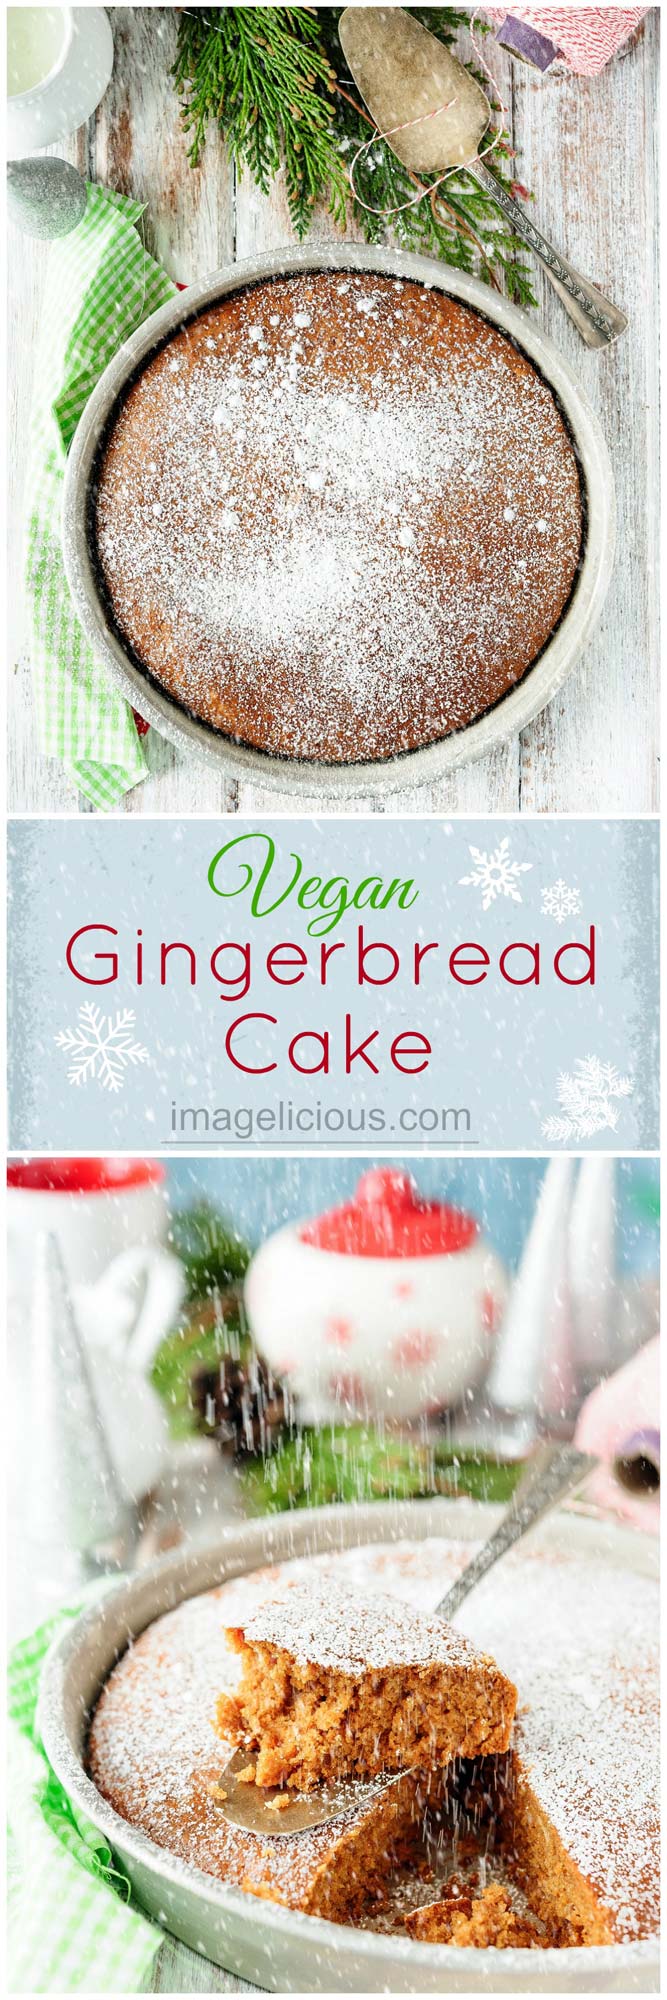 This Vegan Gingerbread Cake is perfect for breakfast with a mug of coffee or an afternoon snack with a cup of tea. It's deliciously spicy and soft and light. Easy one-bowl dessert that can be made even during the busiest holiday season | Imagelicious